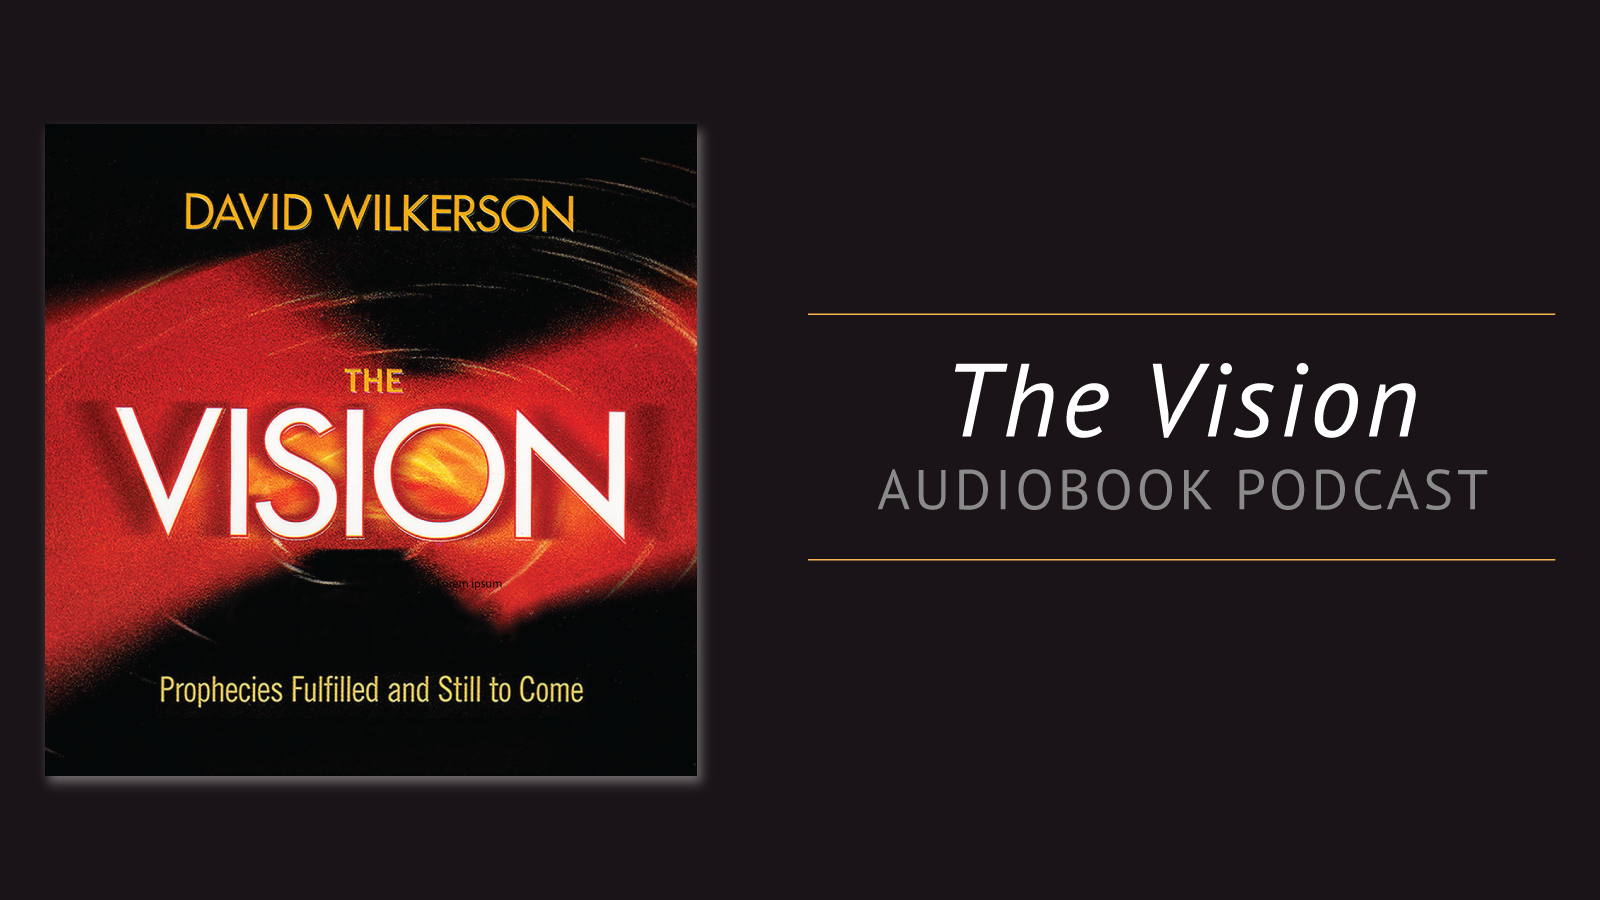 The Vision Audiobook